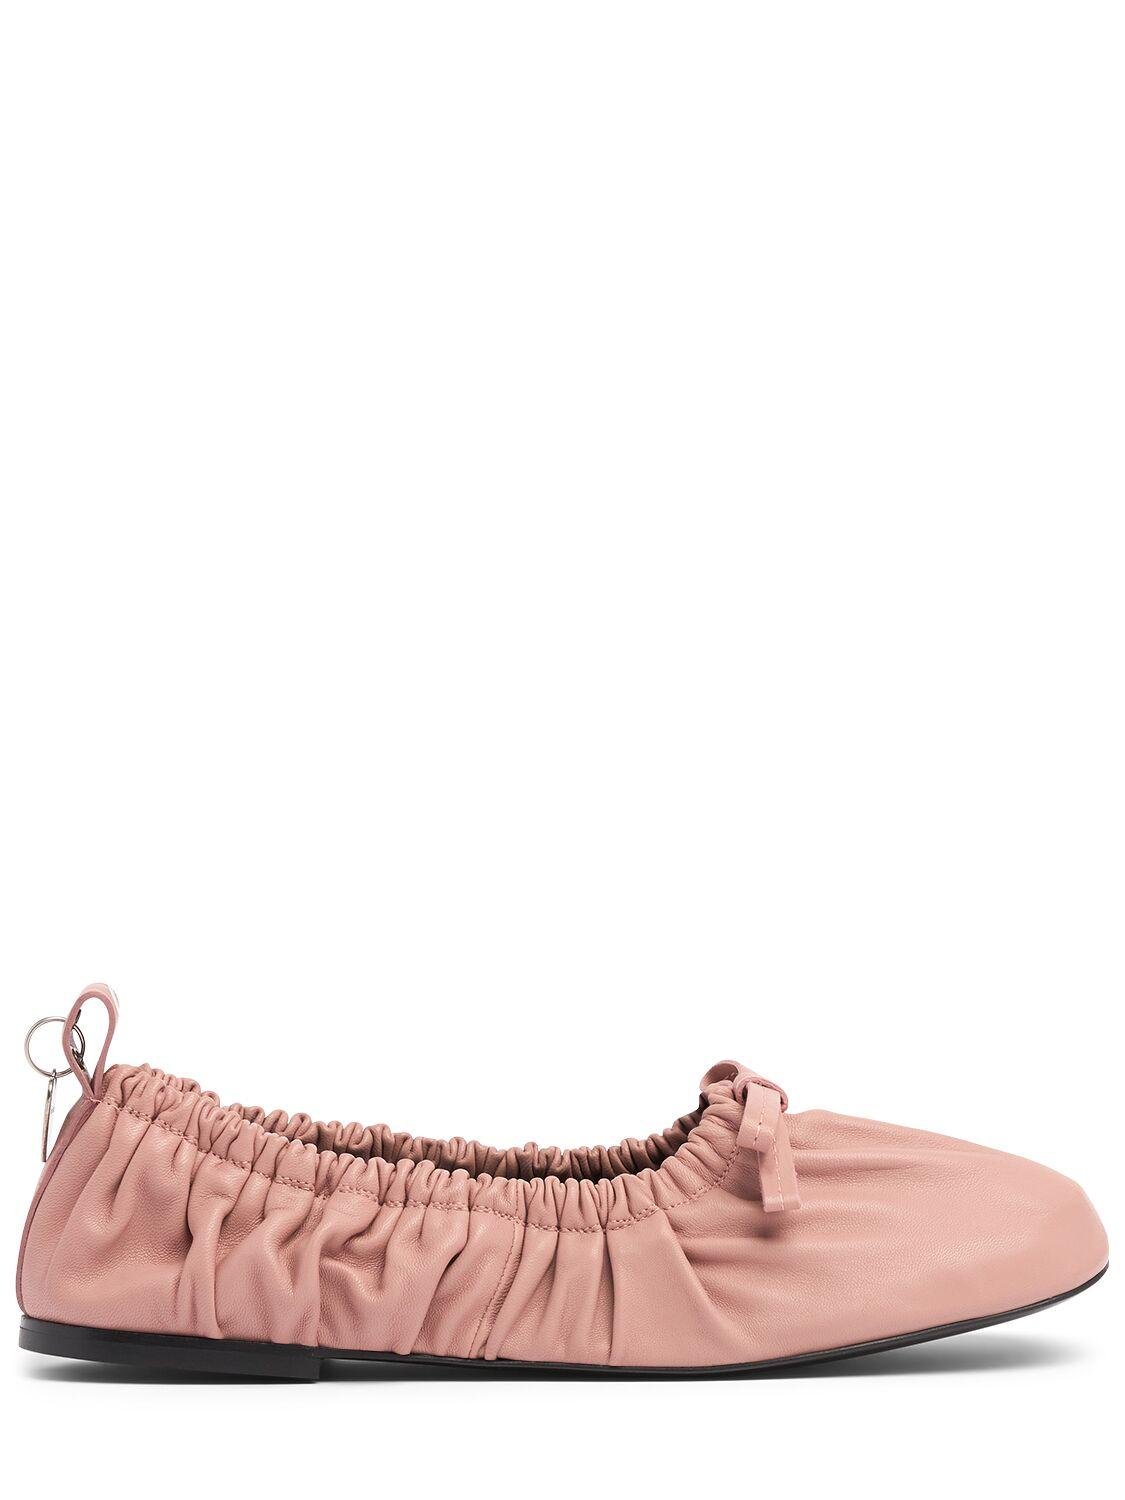 10mm Leather Ballerinas by ACNE STUDIOS